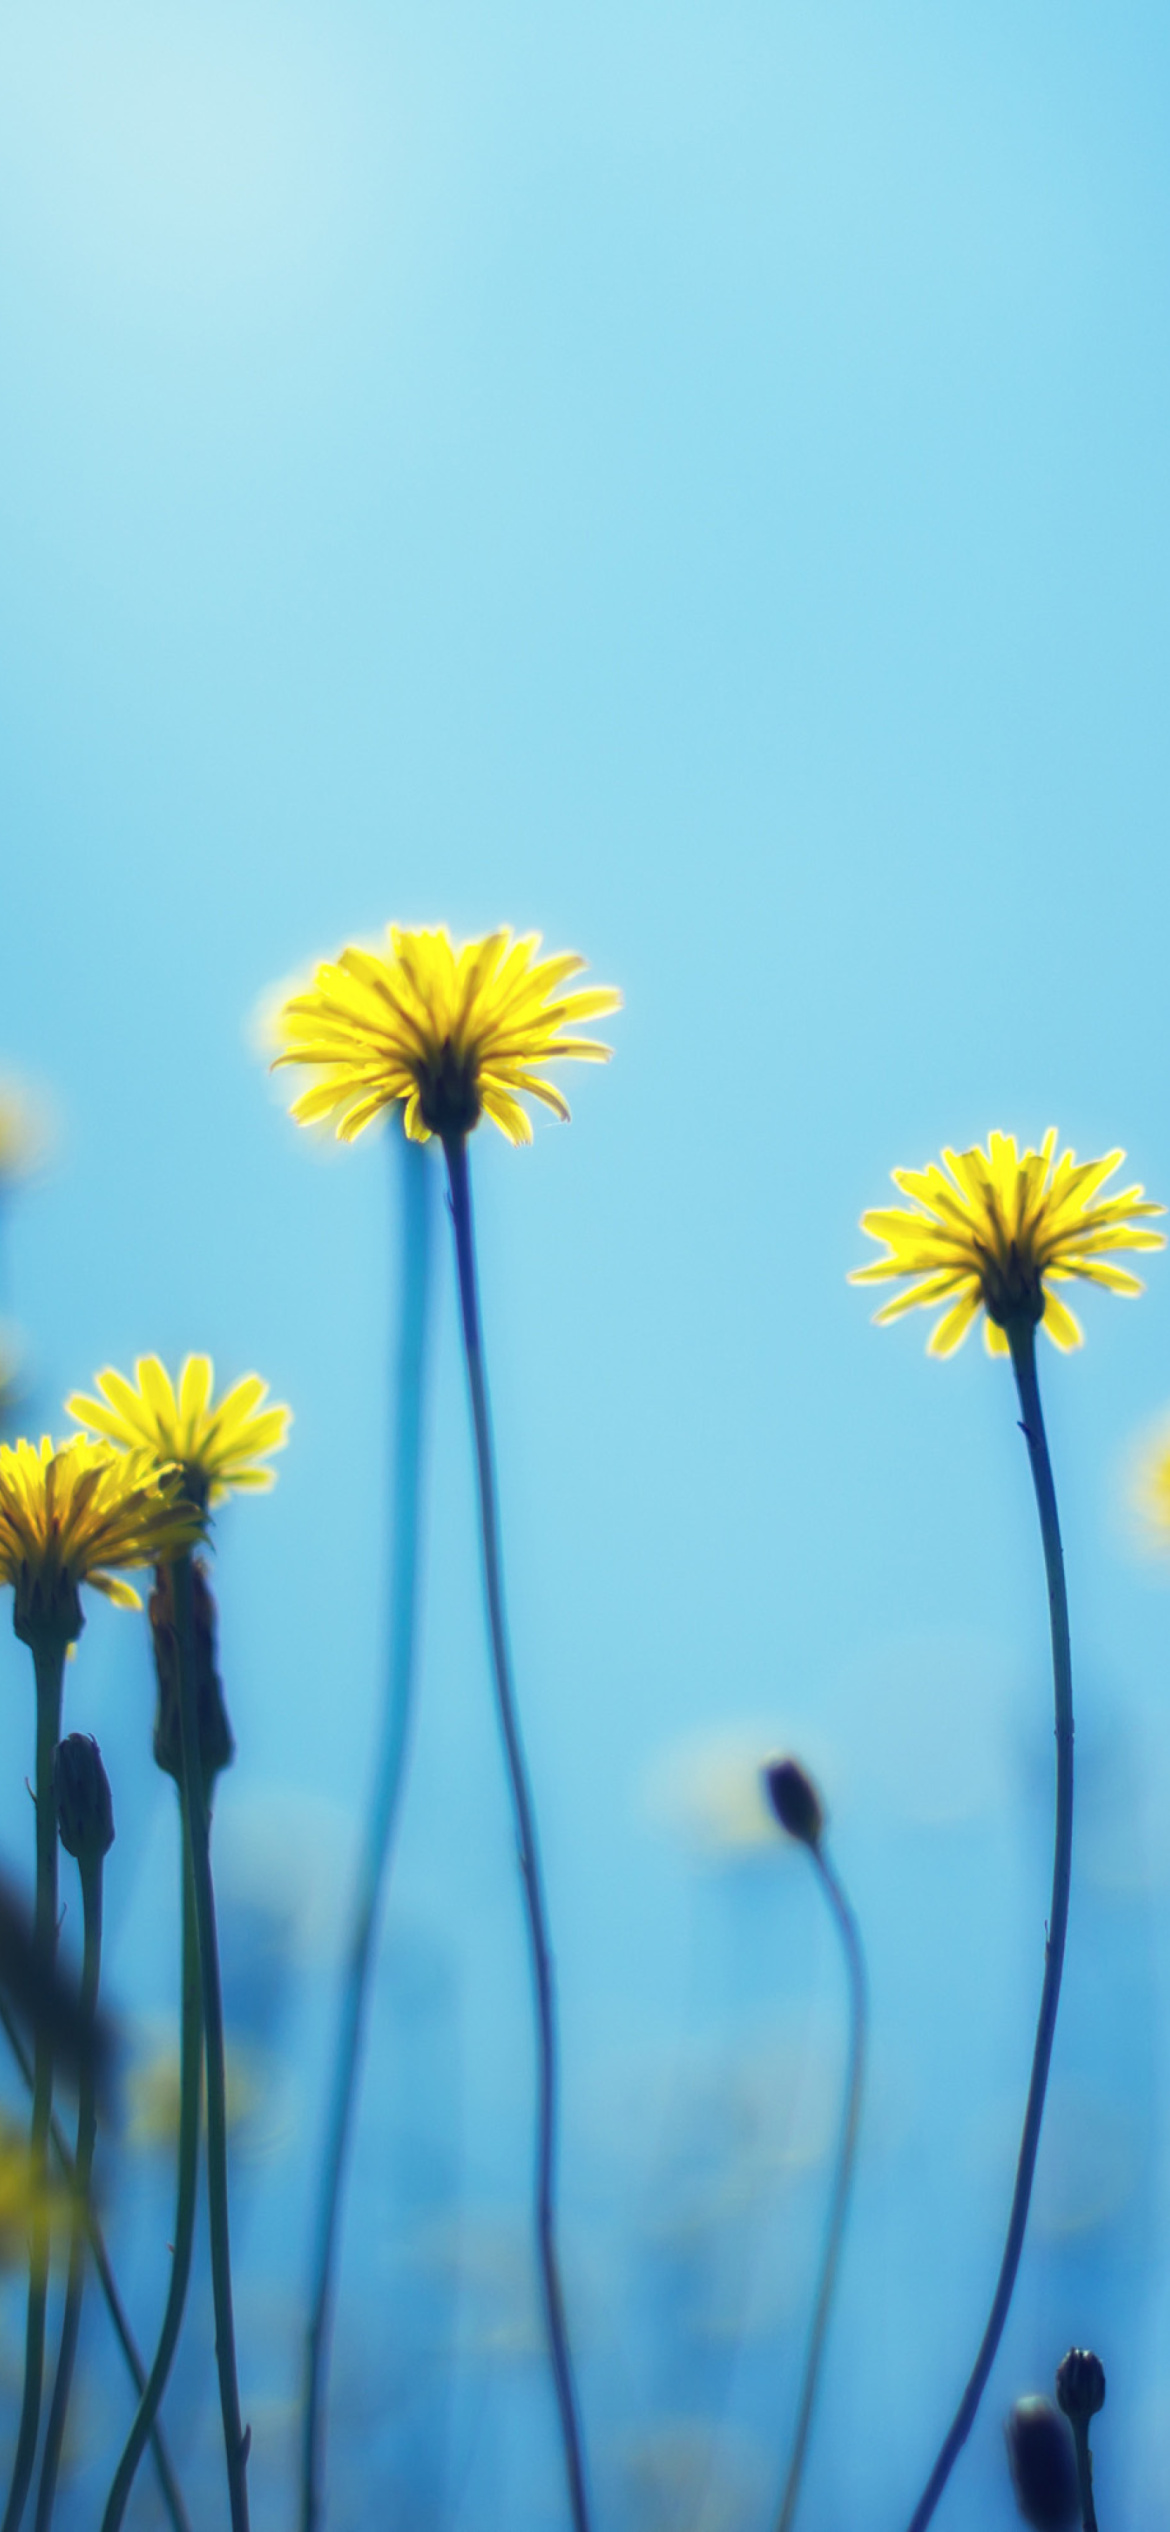 Flowers on blue background wallpaper 1170x2532